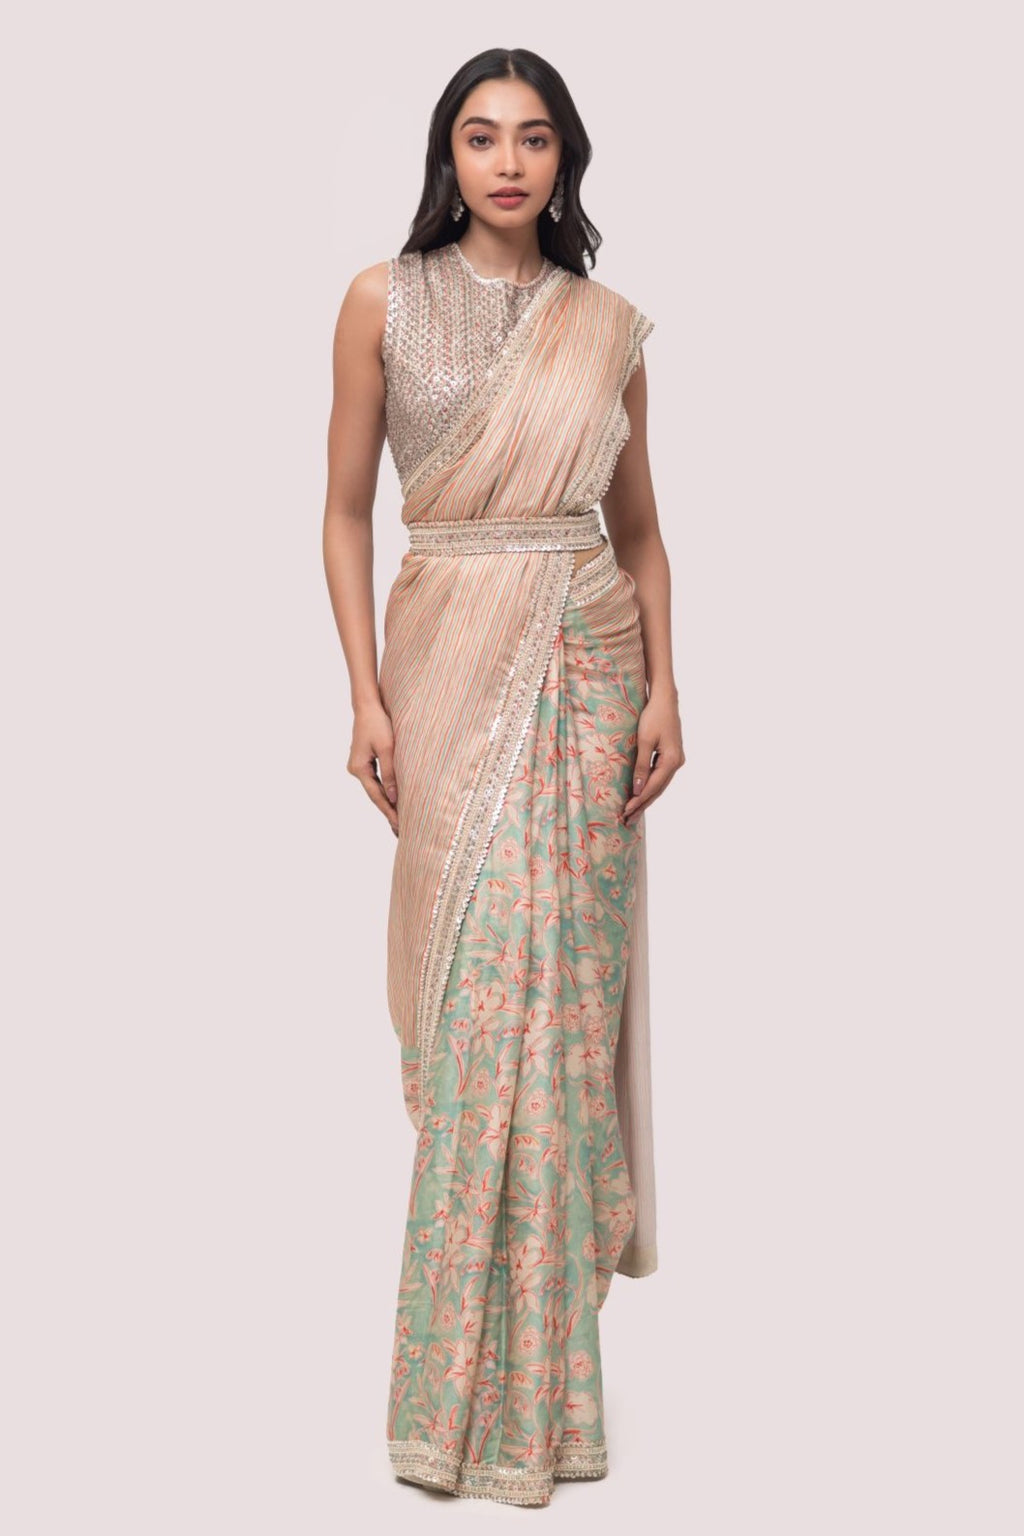 Shop a beautiful multicolored floral saree featuring sequin and cheed work. It comes with a heavily embroidered full-back sleeveless blouse.  Make a fashion statement on festive occasions and weddings with designer sarees, designer suits, Indian dresses, Anarkali suits, palazzo suits, designer gowns, sharara suits, and embroidered sarees from Pure Elegance Indian fashion store in the USA.